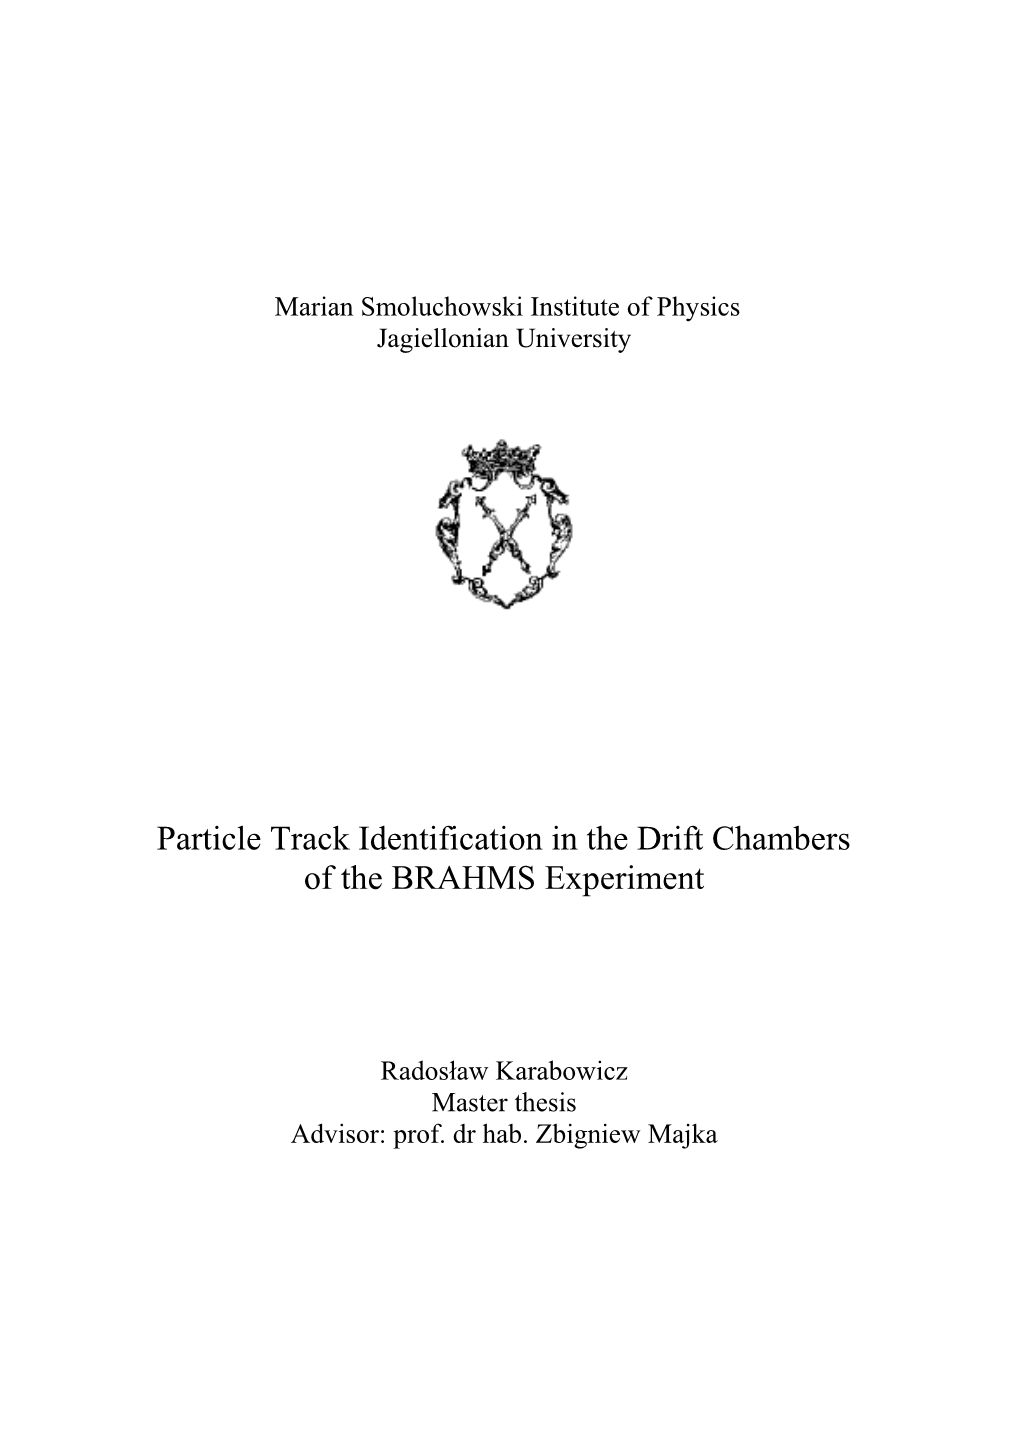 Particle Track Identification in the Drift Chambers